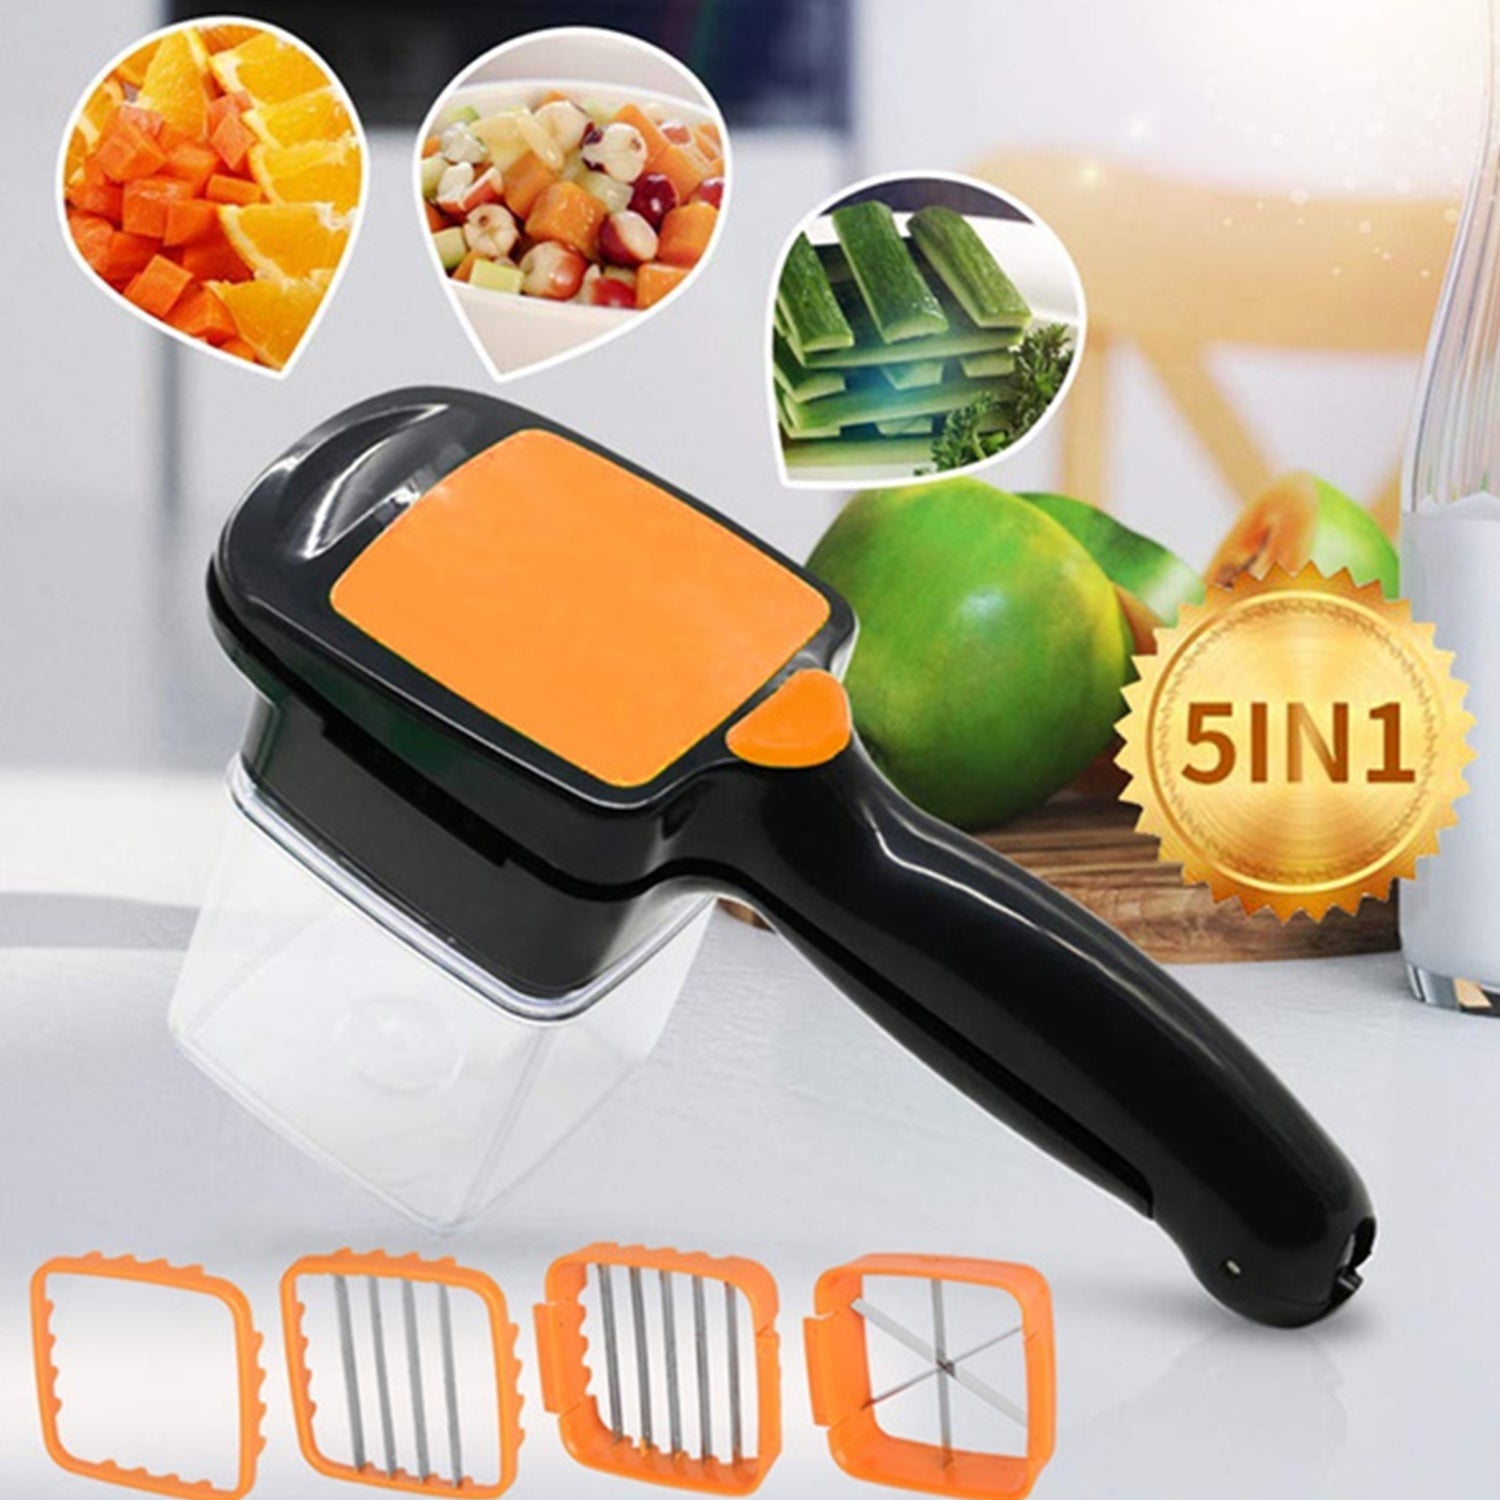 2069 5 In 1 Nicer Dicer used for cutting and shredding of various types of food stuff in all kitchen purposes.